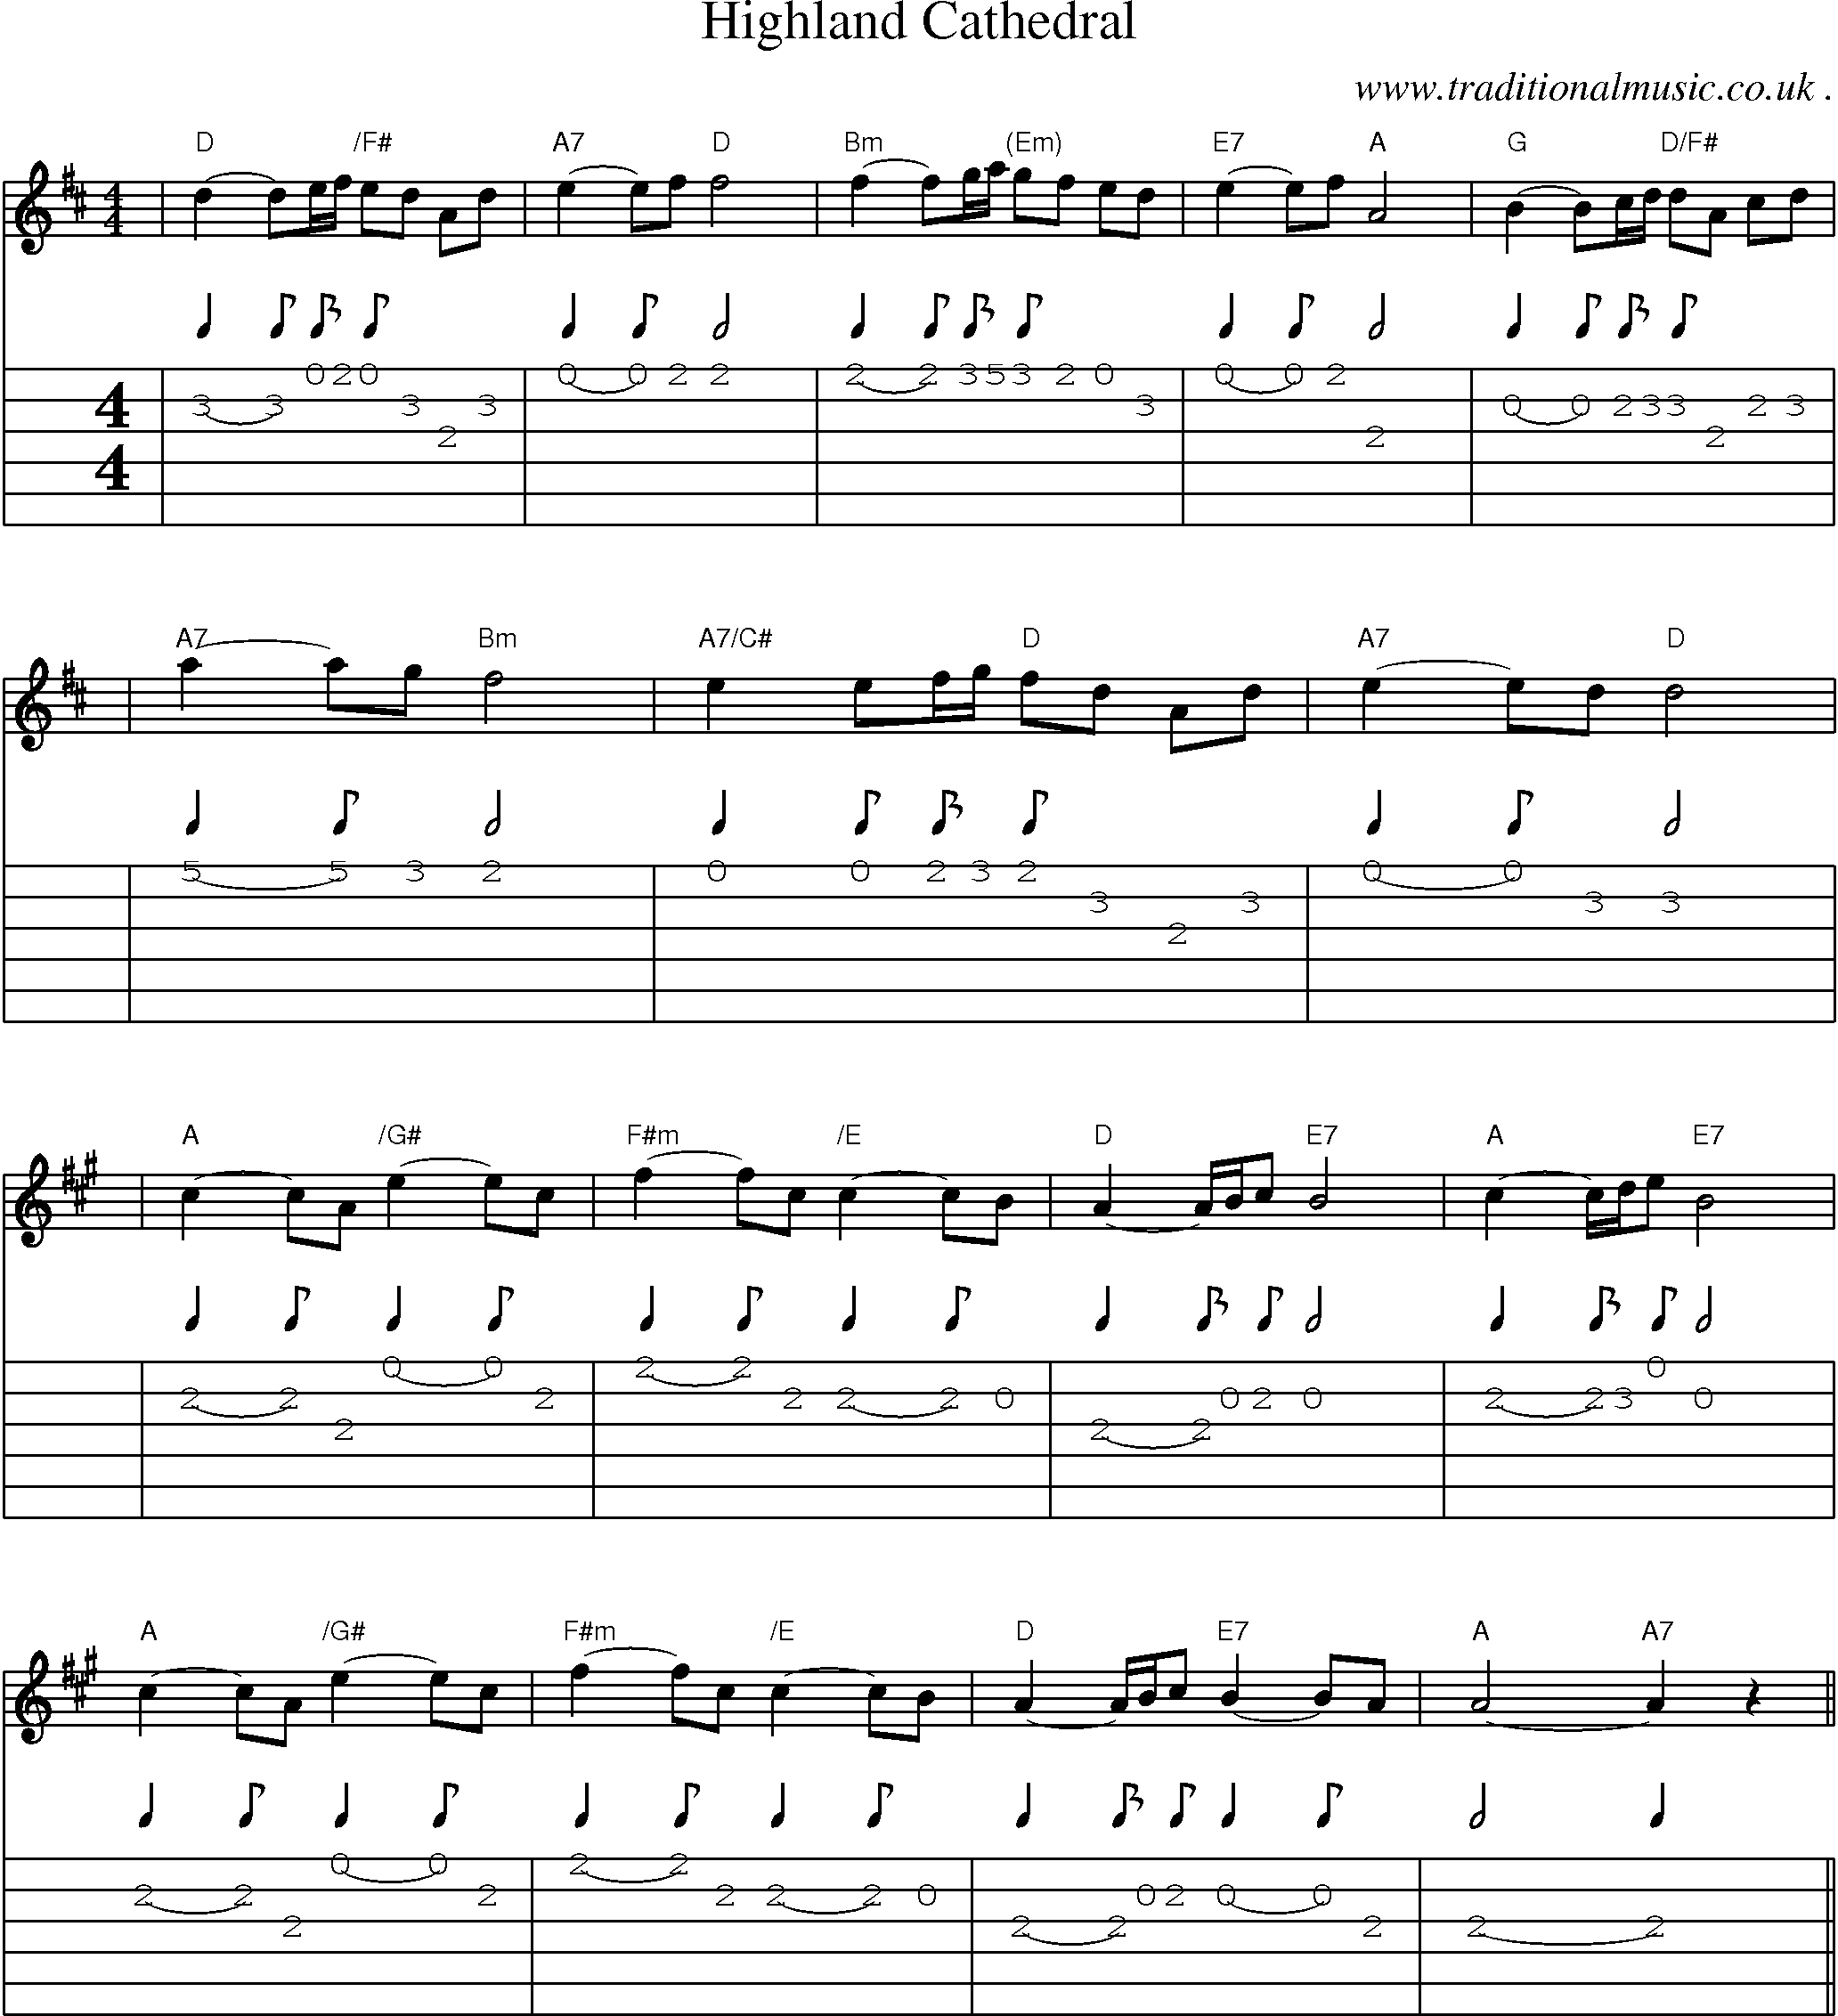 Sheet-music  score, Chords and Guitar Tabs for Highland Cathedral